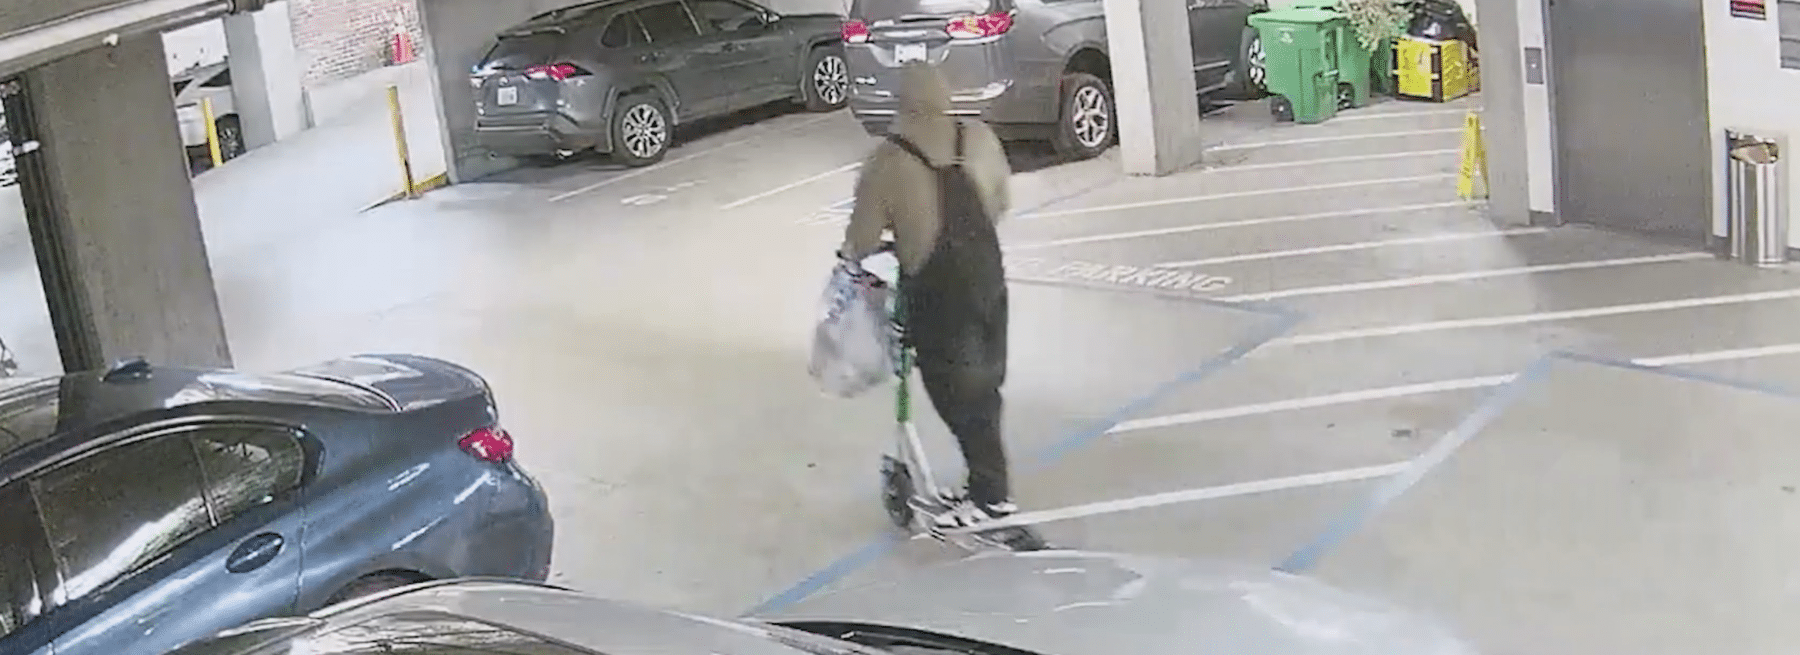 Person on scooter in apartment parking garage